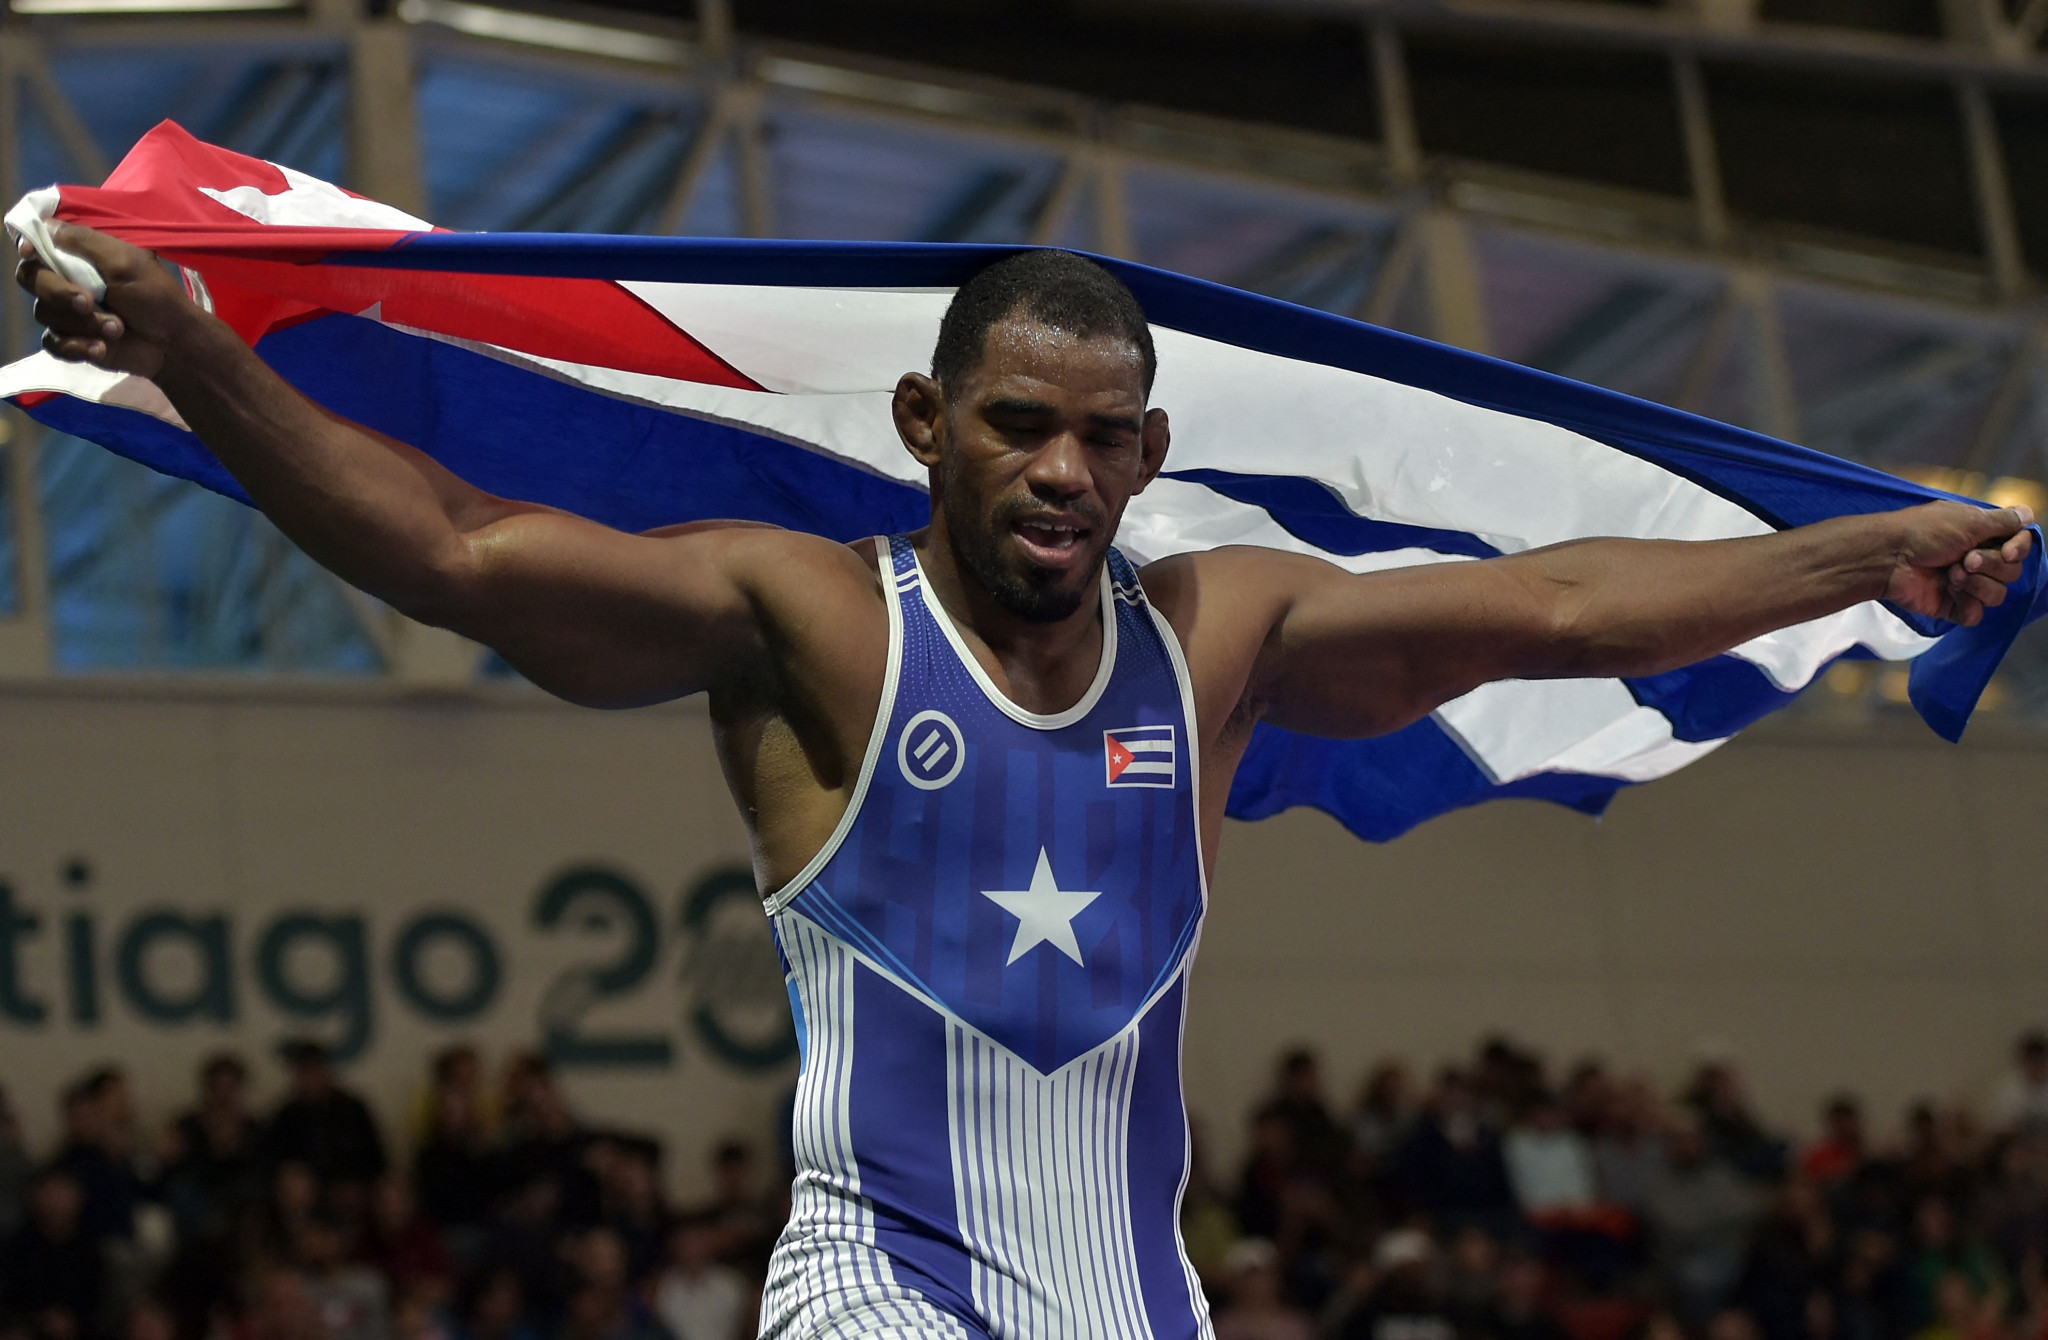 Cuba shines with three gold medals in wrestling at the Pan American Games